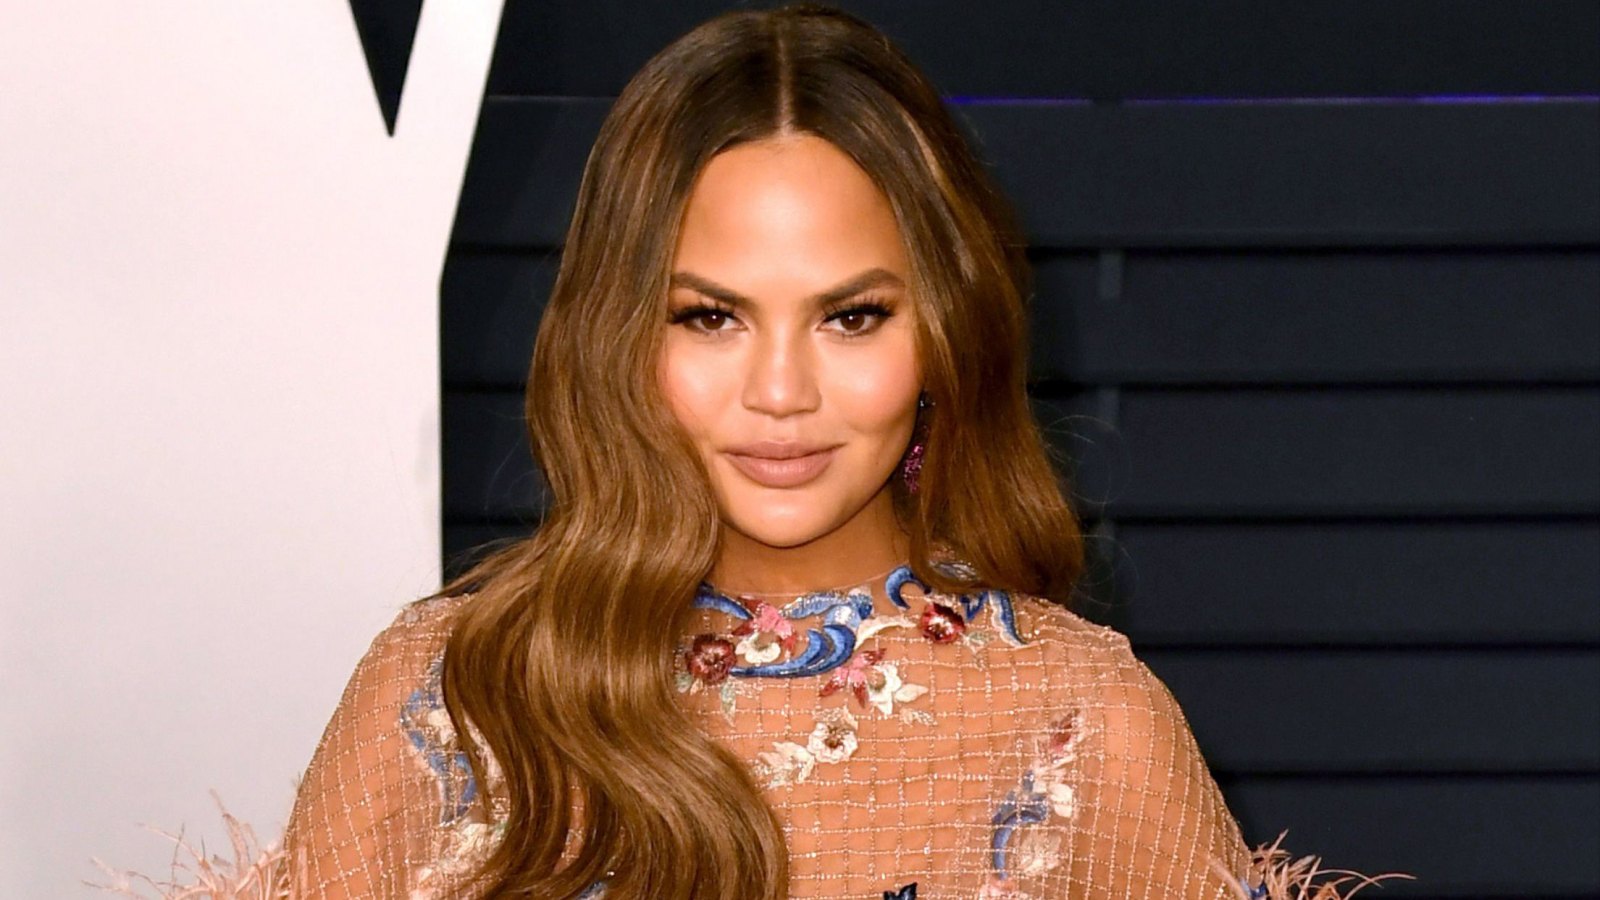 Chrissy Teigen Claps Back at Troll Who Tells Her to 'Cover Up' Around Her Daughter